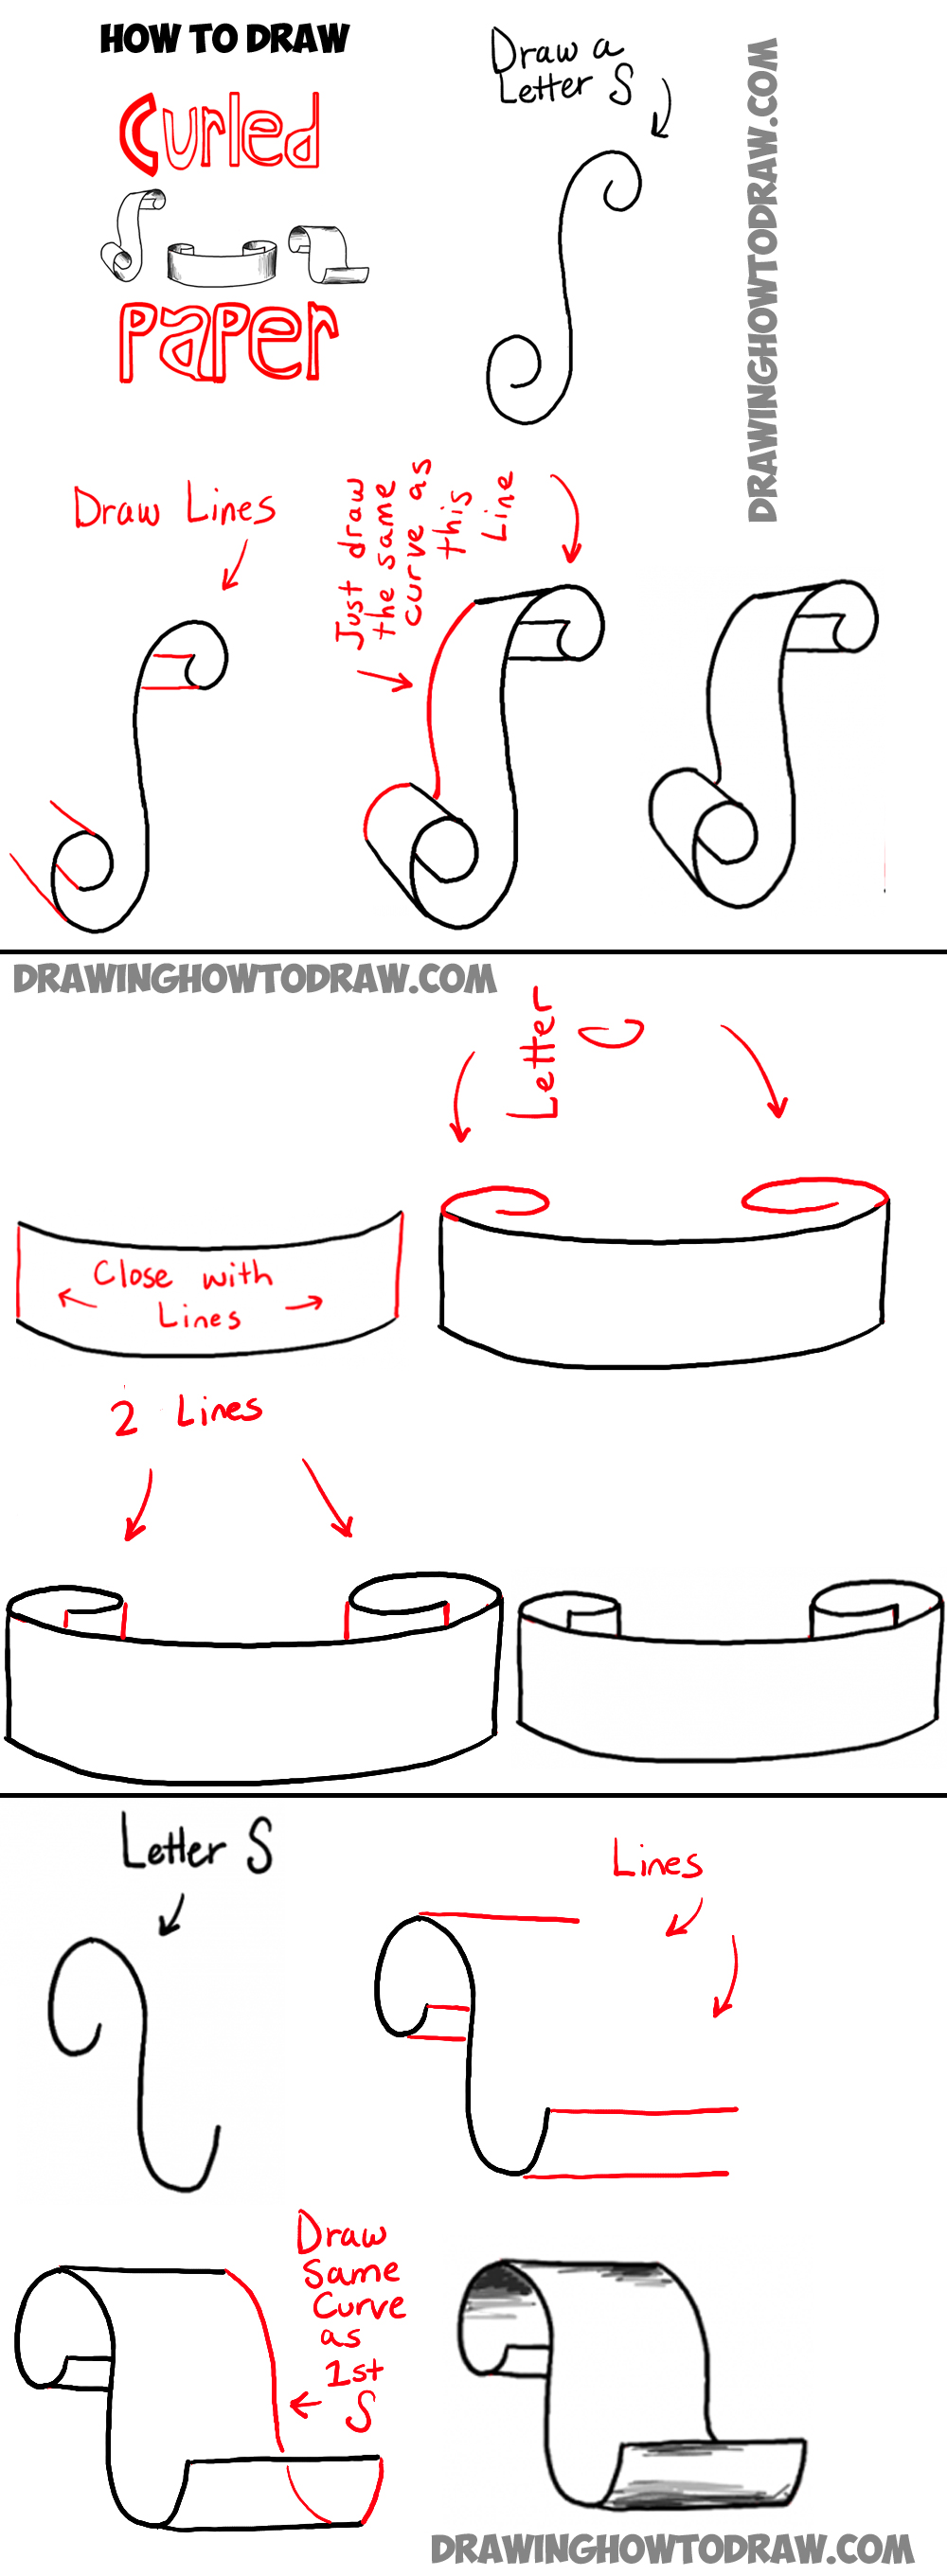 how to draw curled paper - like scrolls